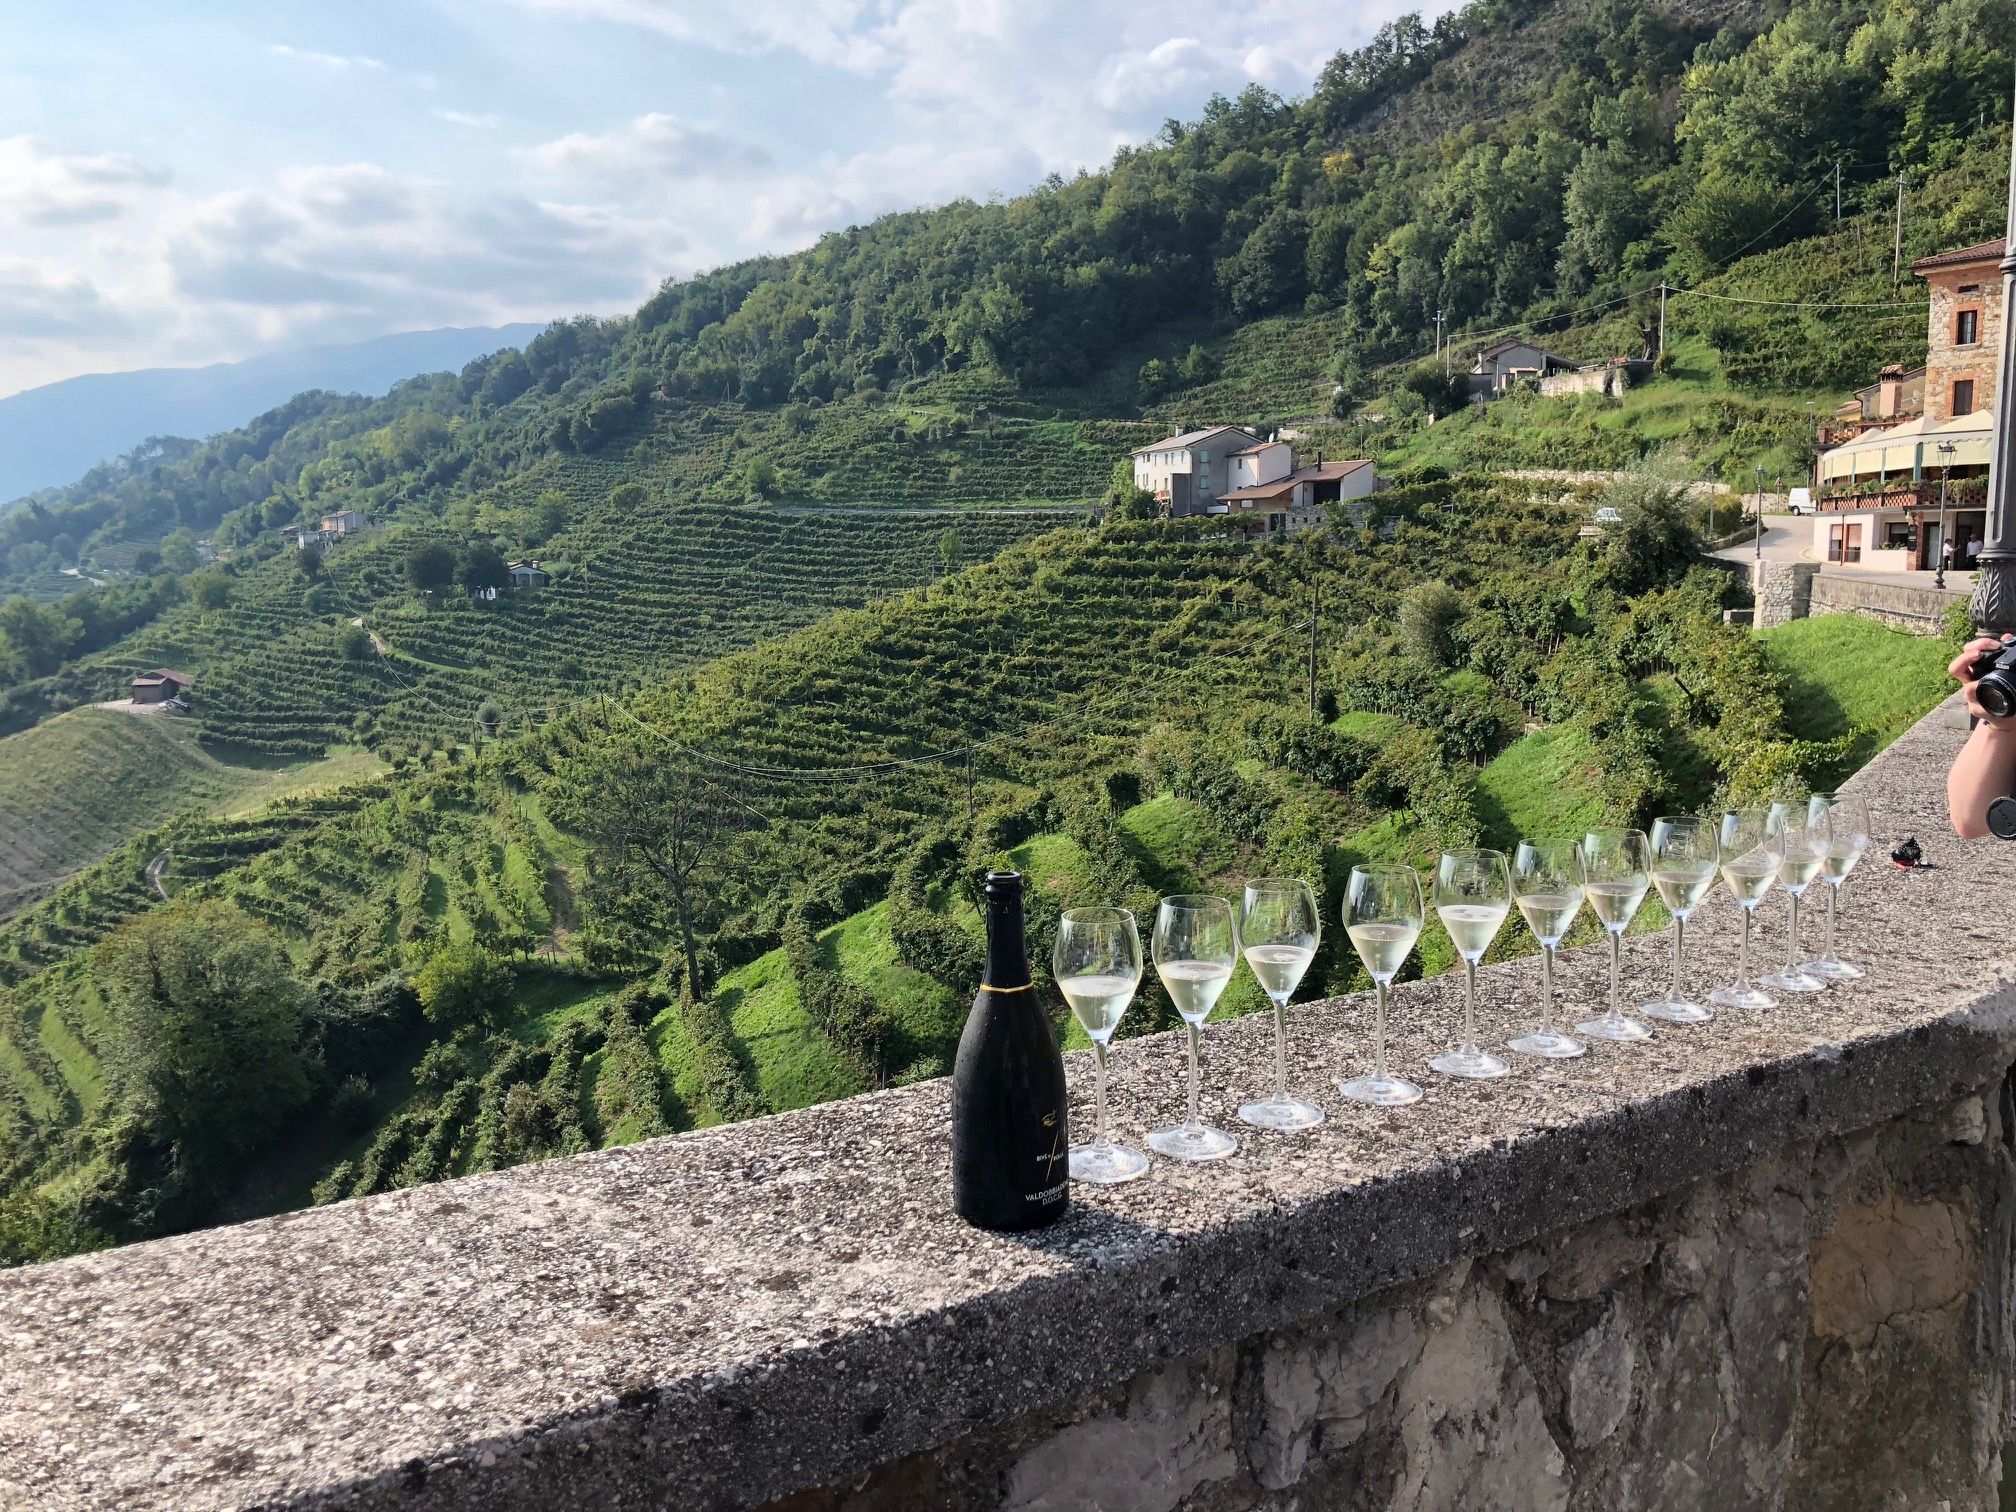 Time for Prosecco Superiore to fly the flag for Italy’s sparkling wine